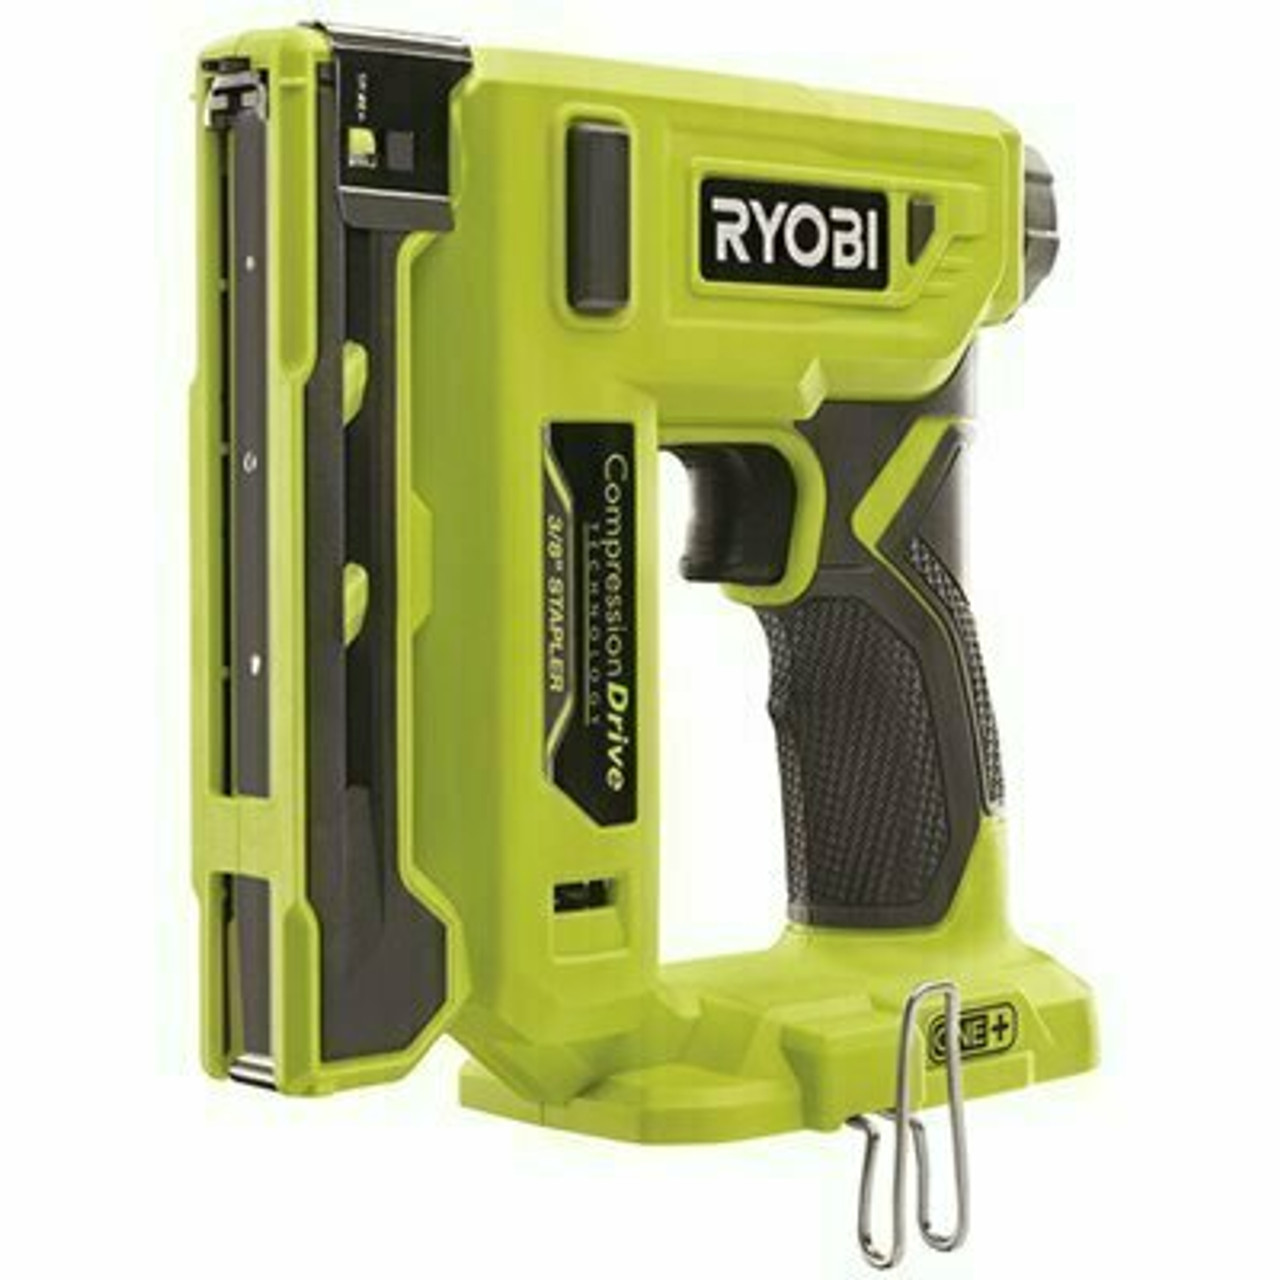 Ryobi One+ 18V Cordless Compression Drive 3/8 In. Crown Stapler (Tool Only)